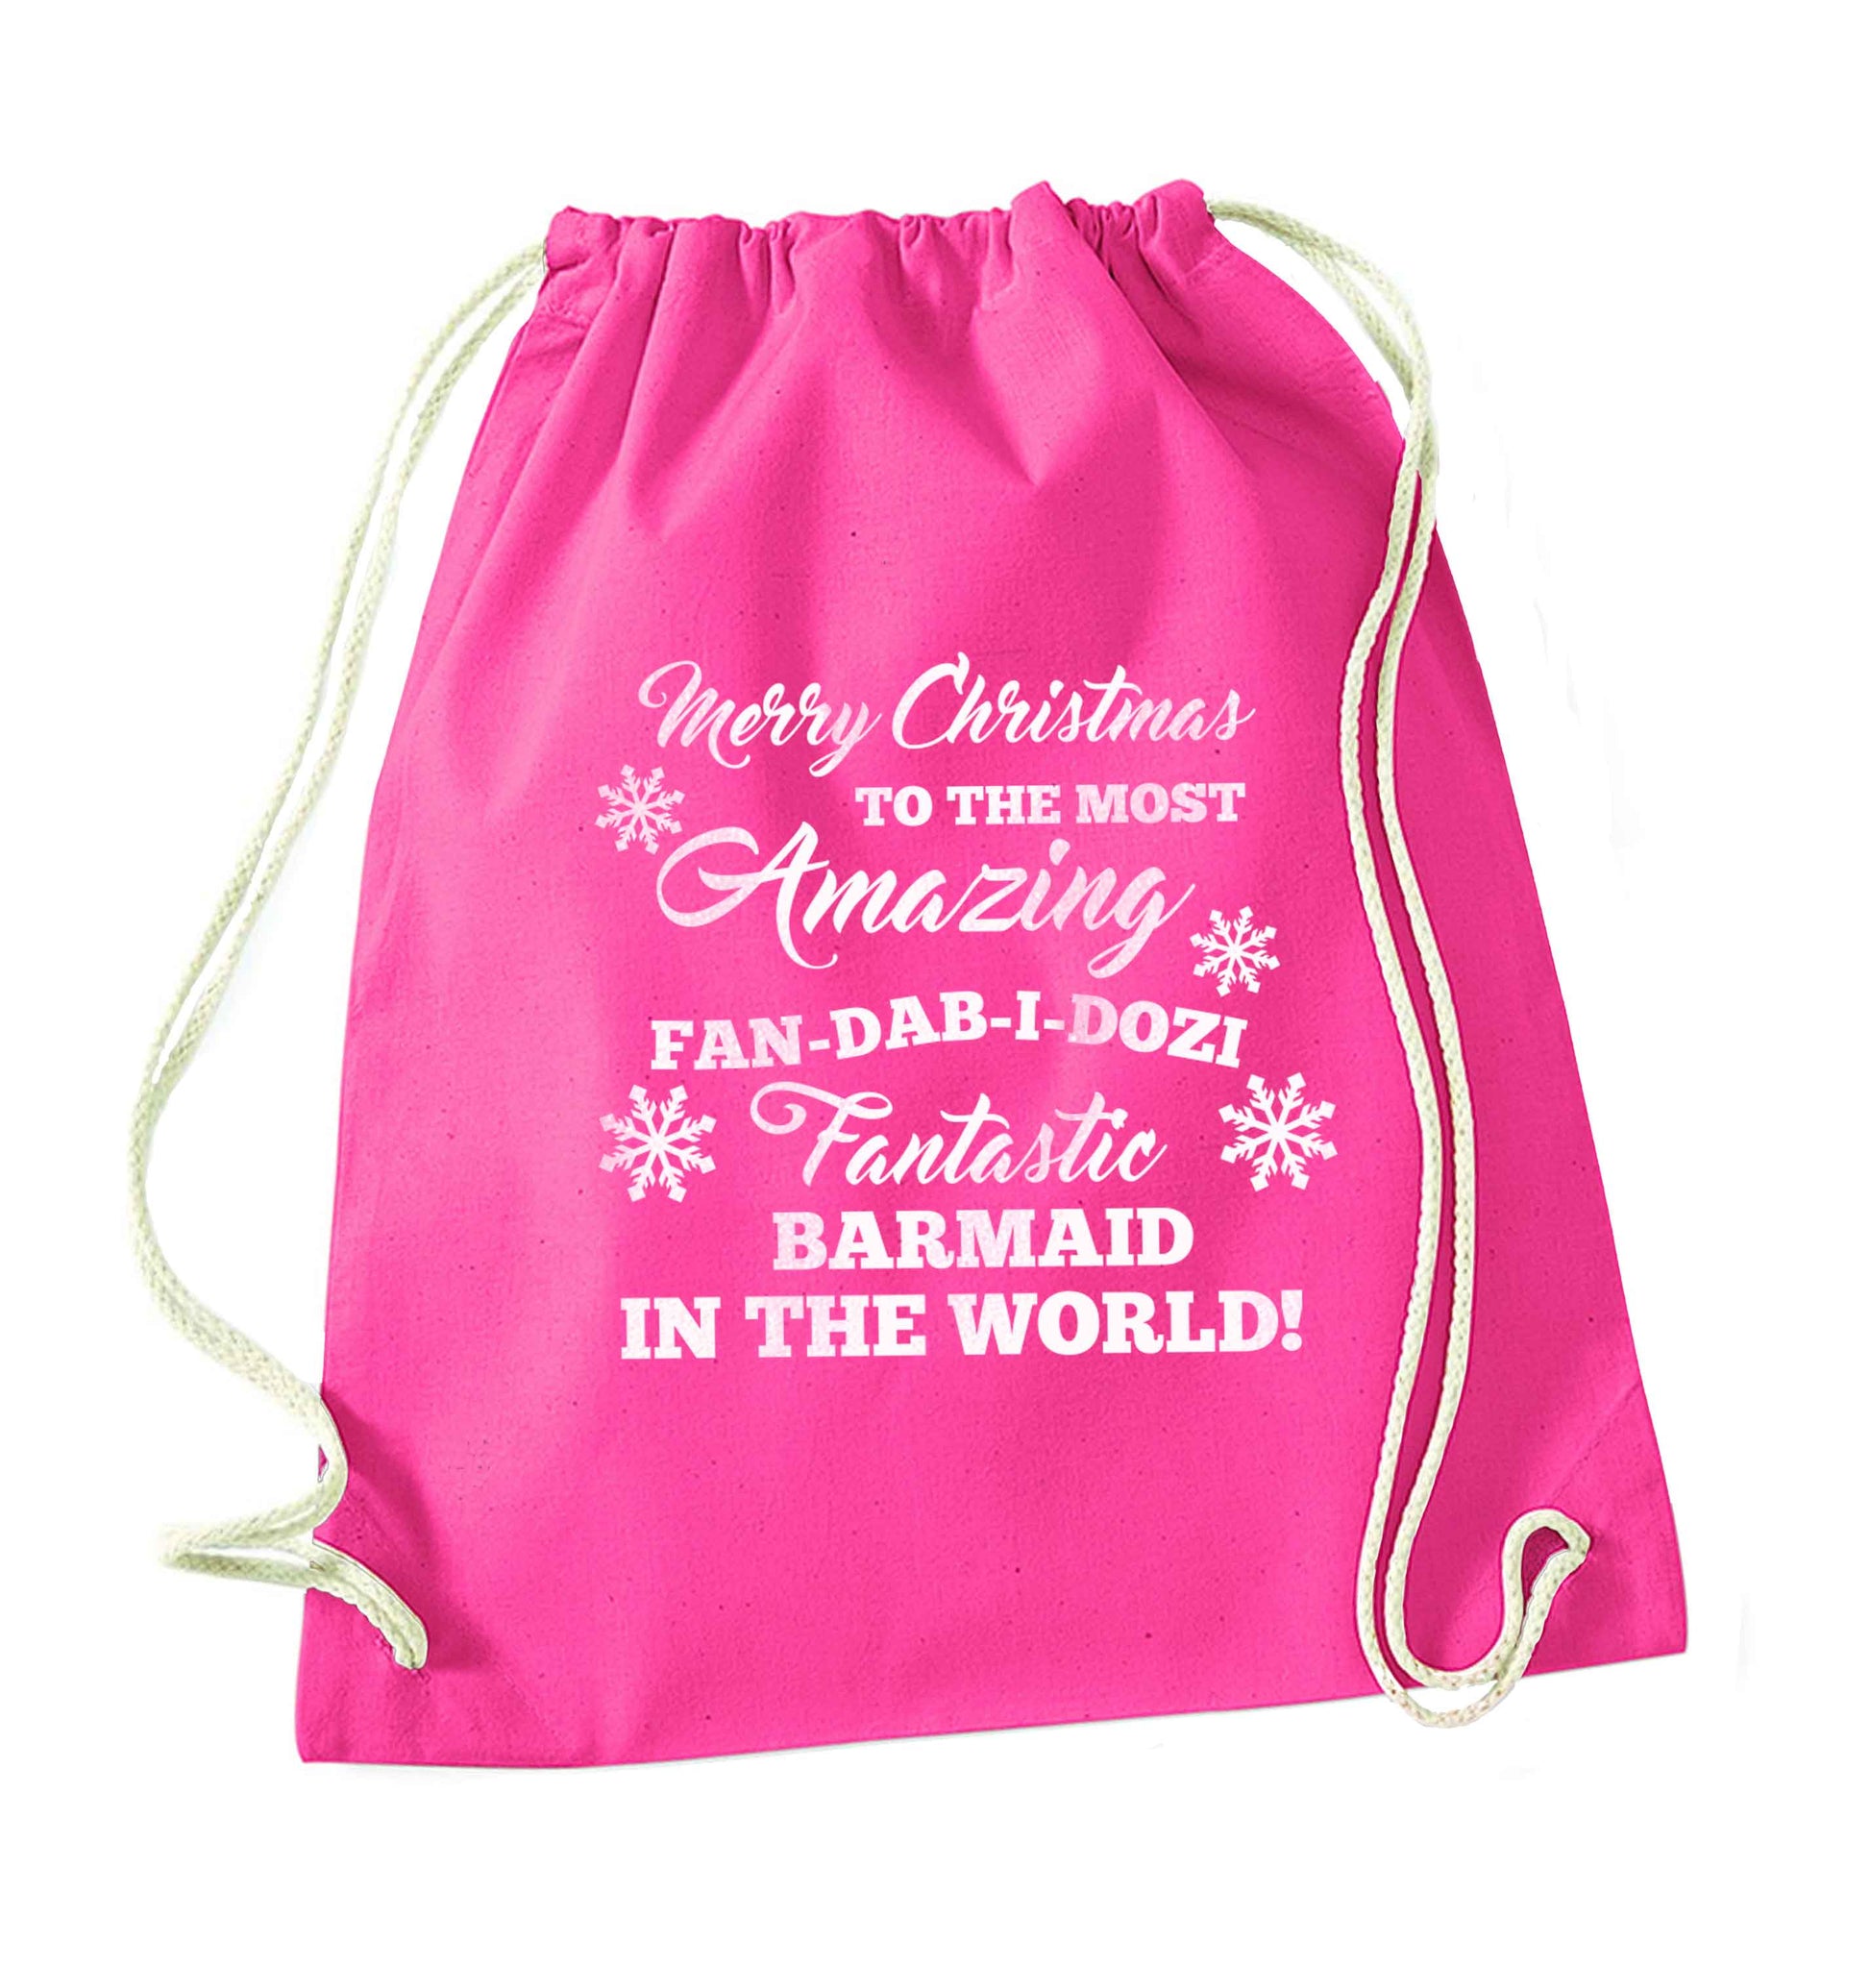 Merry Christmas to the most amazing barmaid in the world! pink drawstring bag